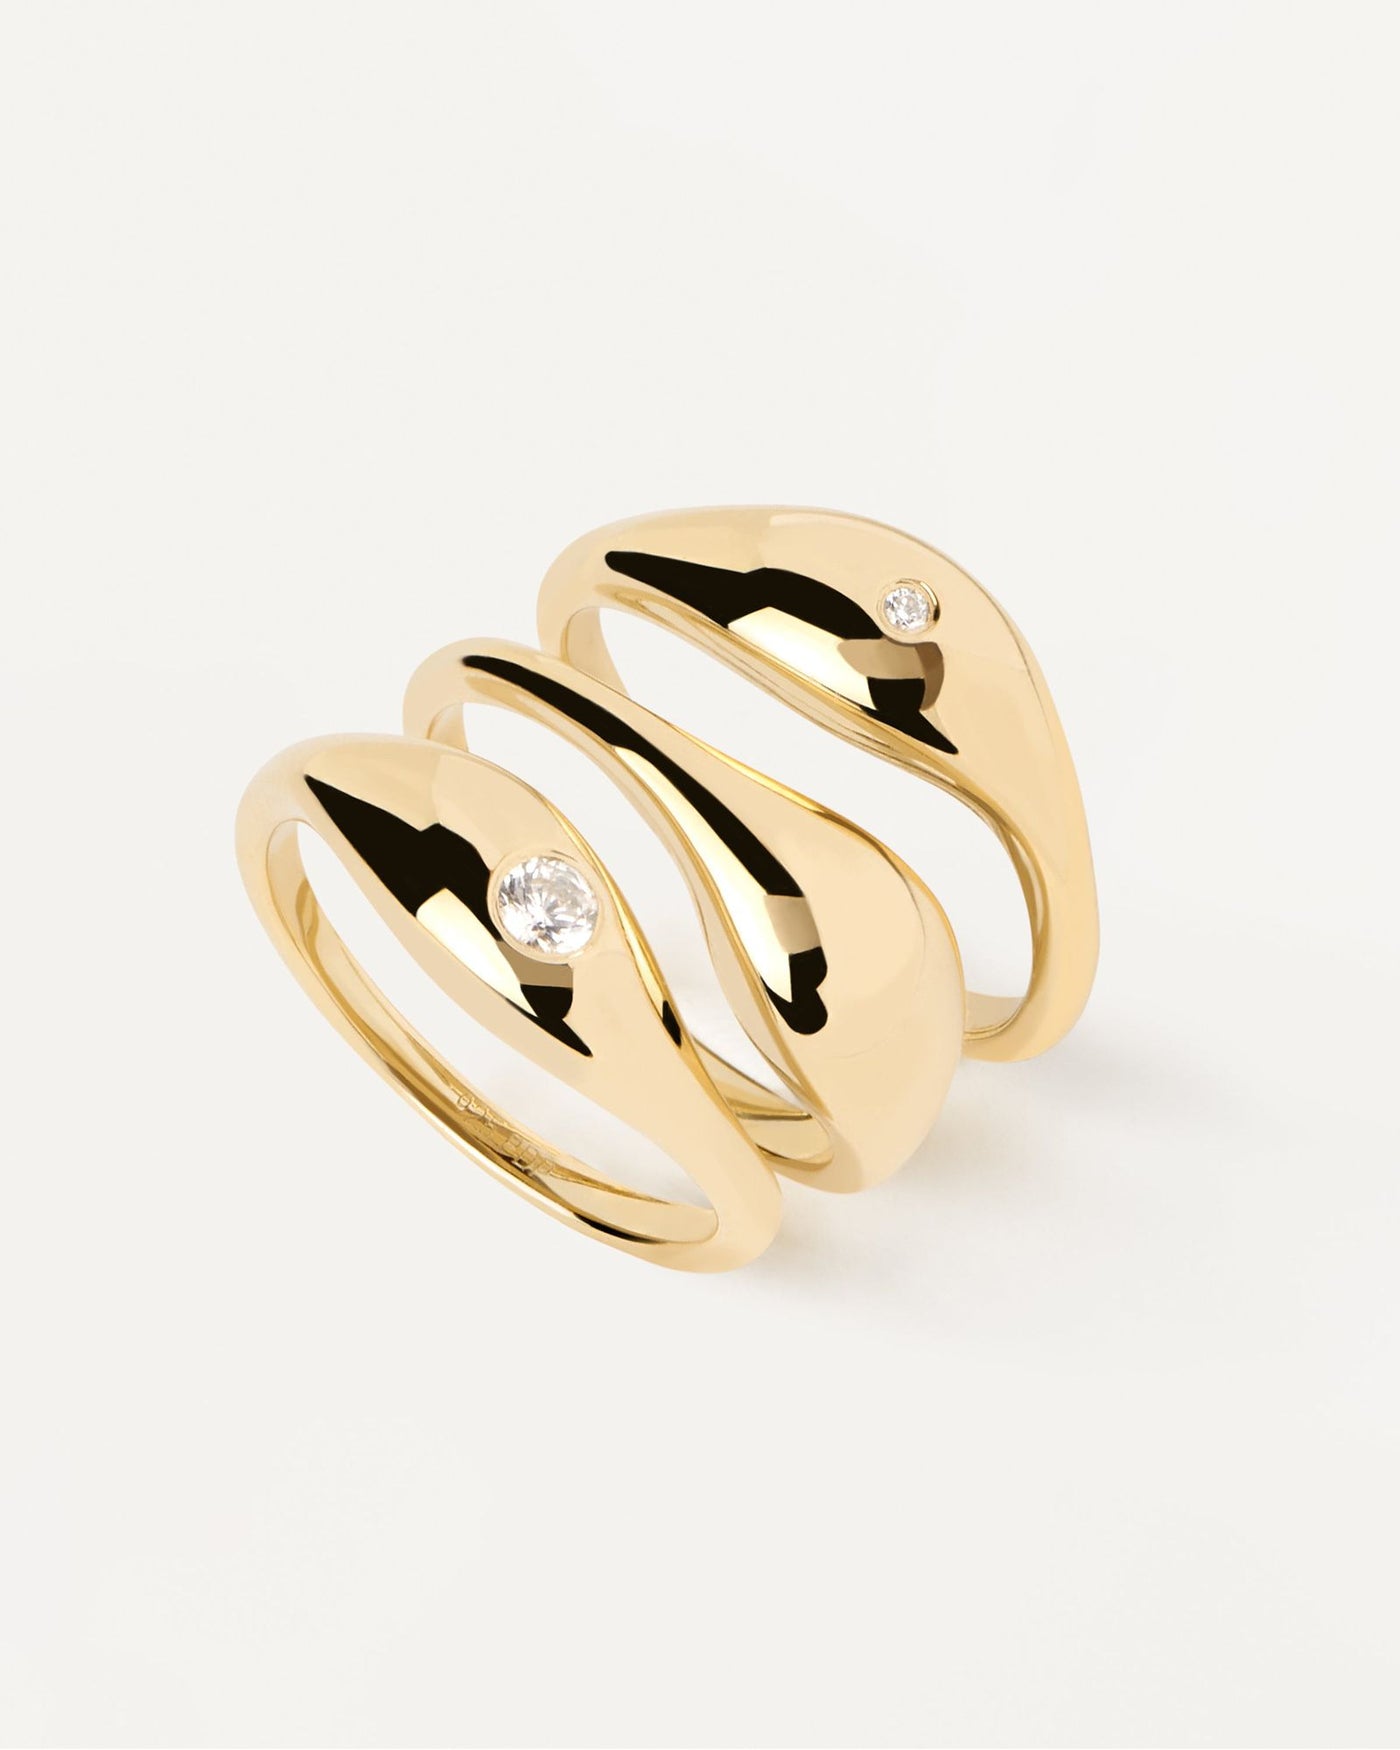 2024 Selection | Sugar Ring Set. Gold-plated silver set of three signet rings with white zirconia. Get the latest arrival from PDPAOLA. Place your order safely and get this Best Seller. Free Shipping.